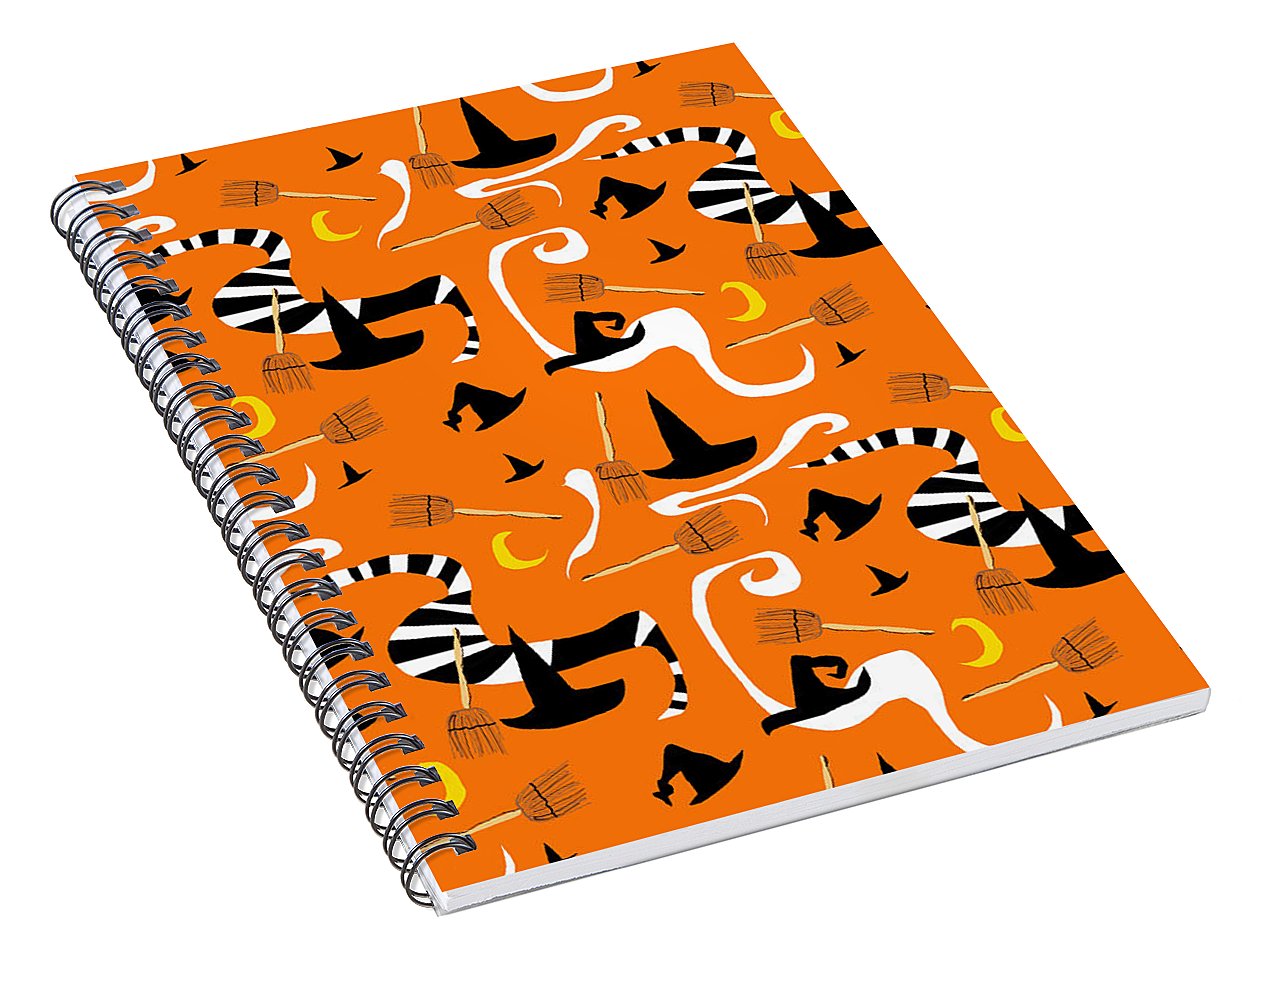 Witches Hats and Brooms - Spiral Notebook